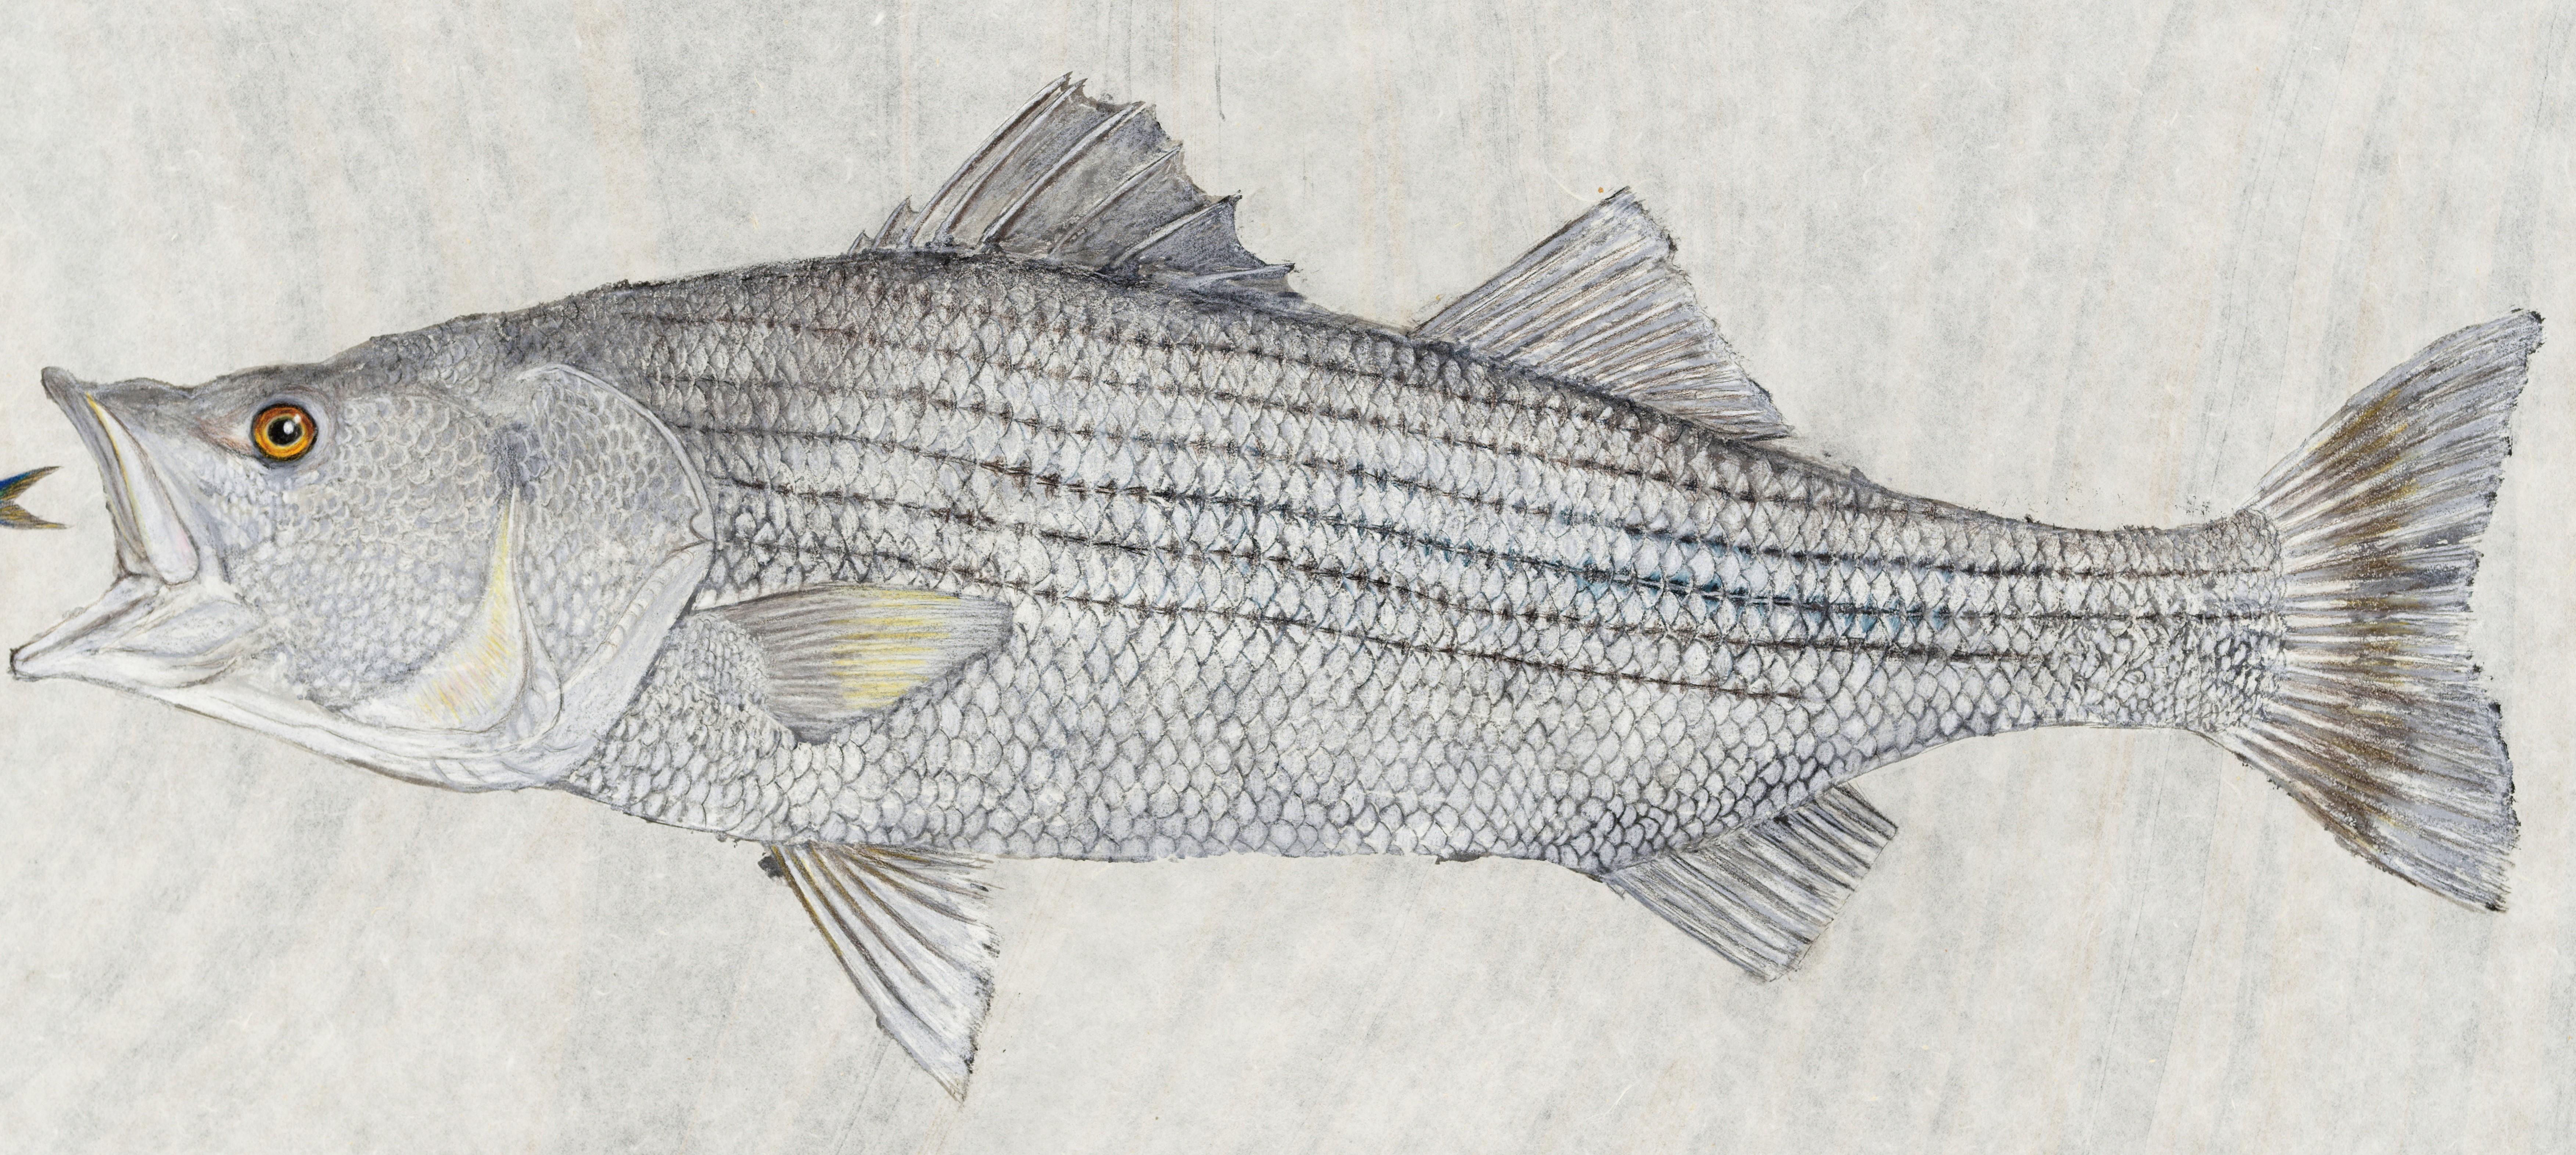 Big Mack Attack - Striped Bass Eating a Mackerel, Watercolor on Mulberry Paper  - Painting by Jeff Conroy